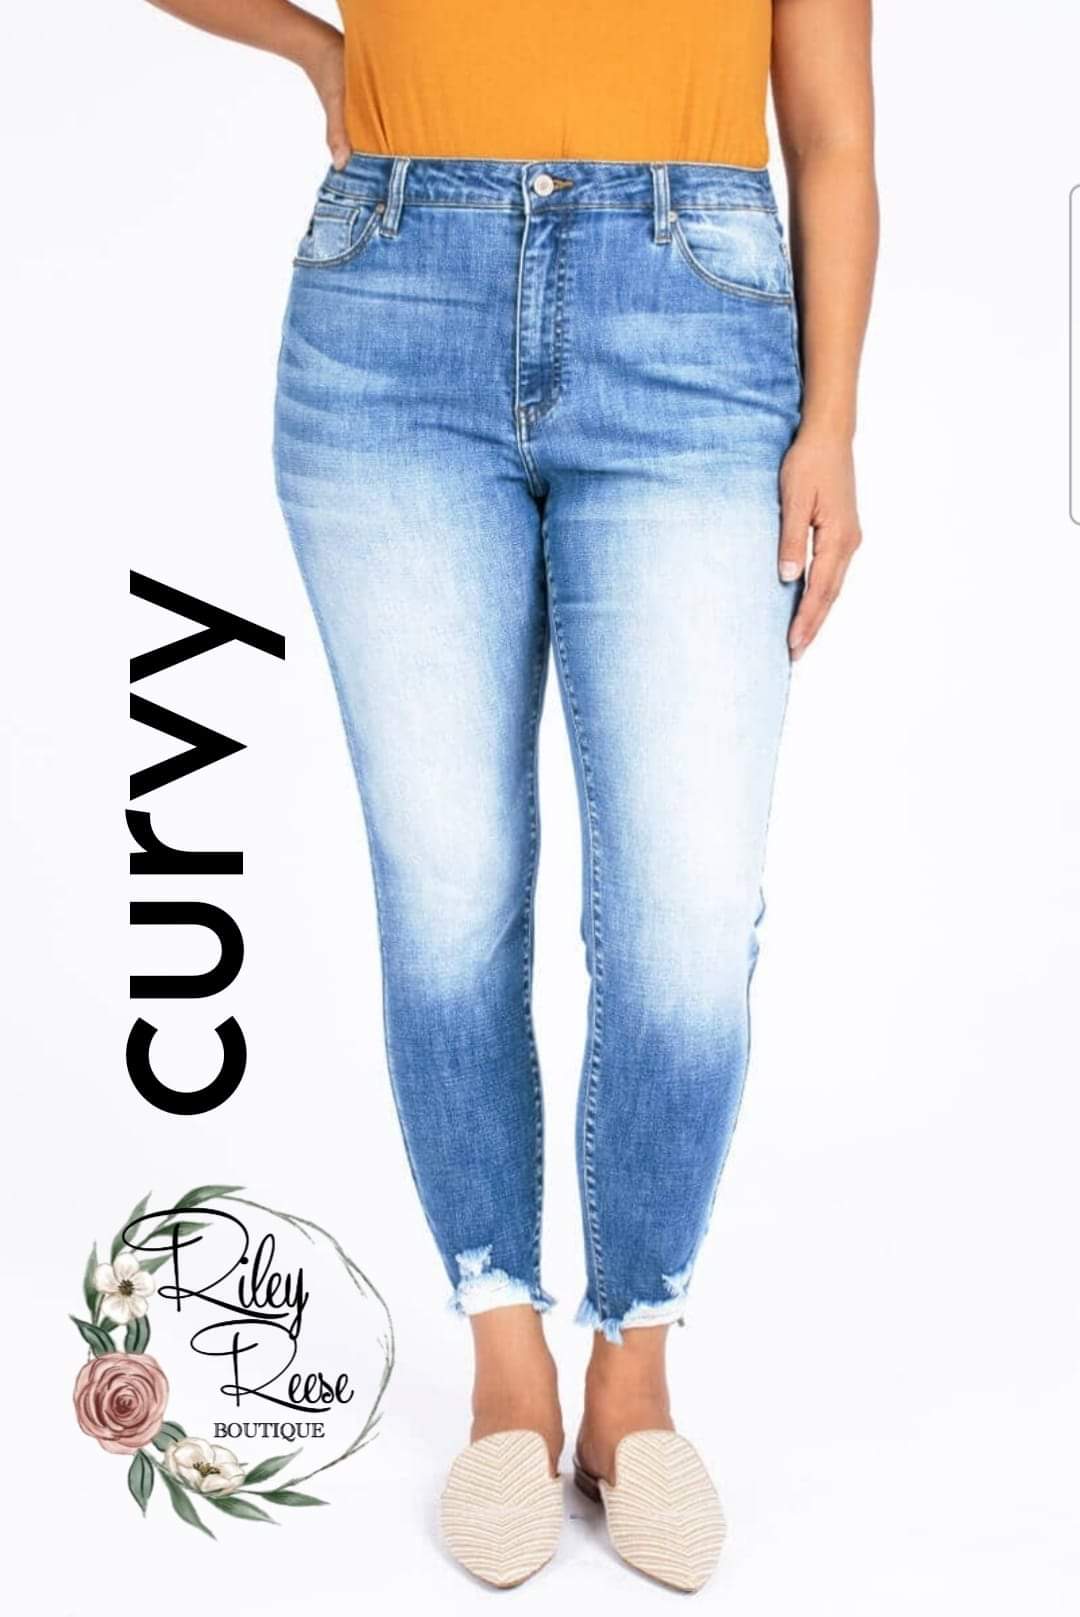 The Jessa- Kan Can Curvy Washed Denim